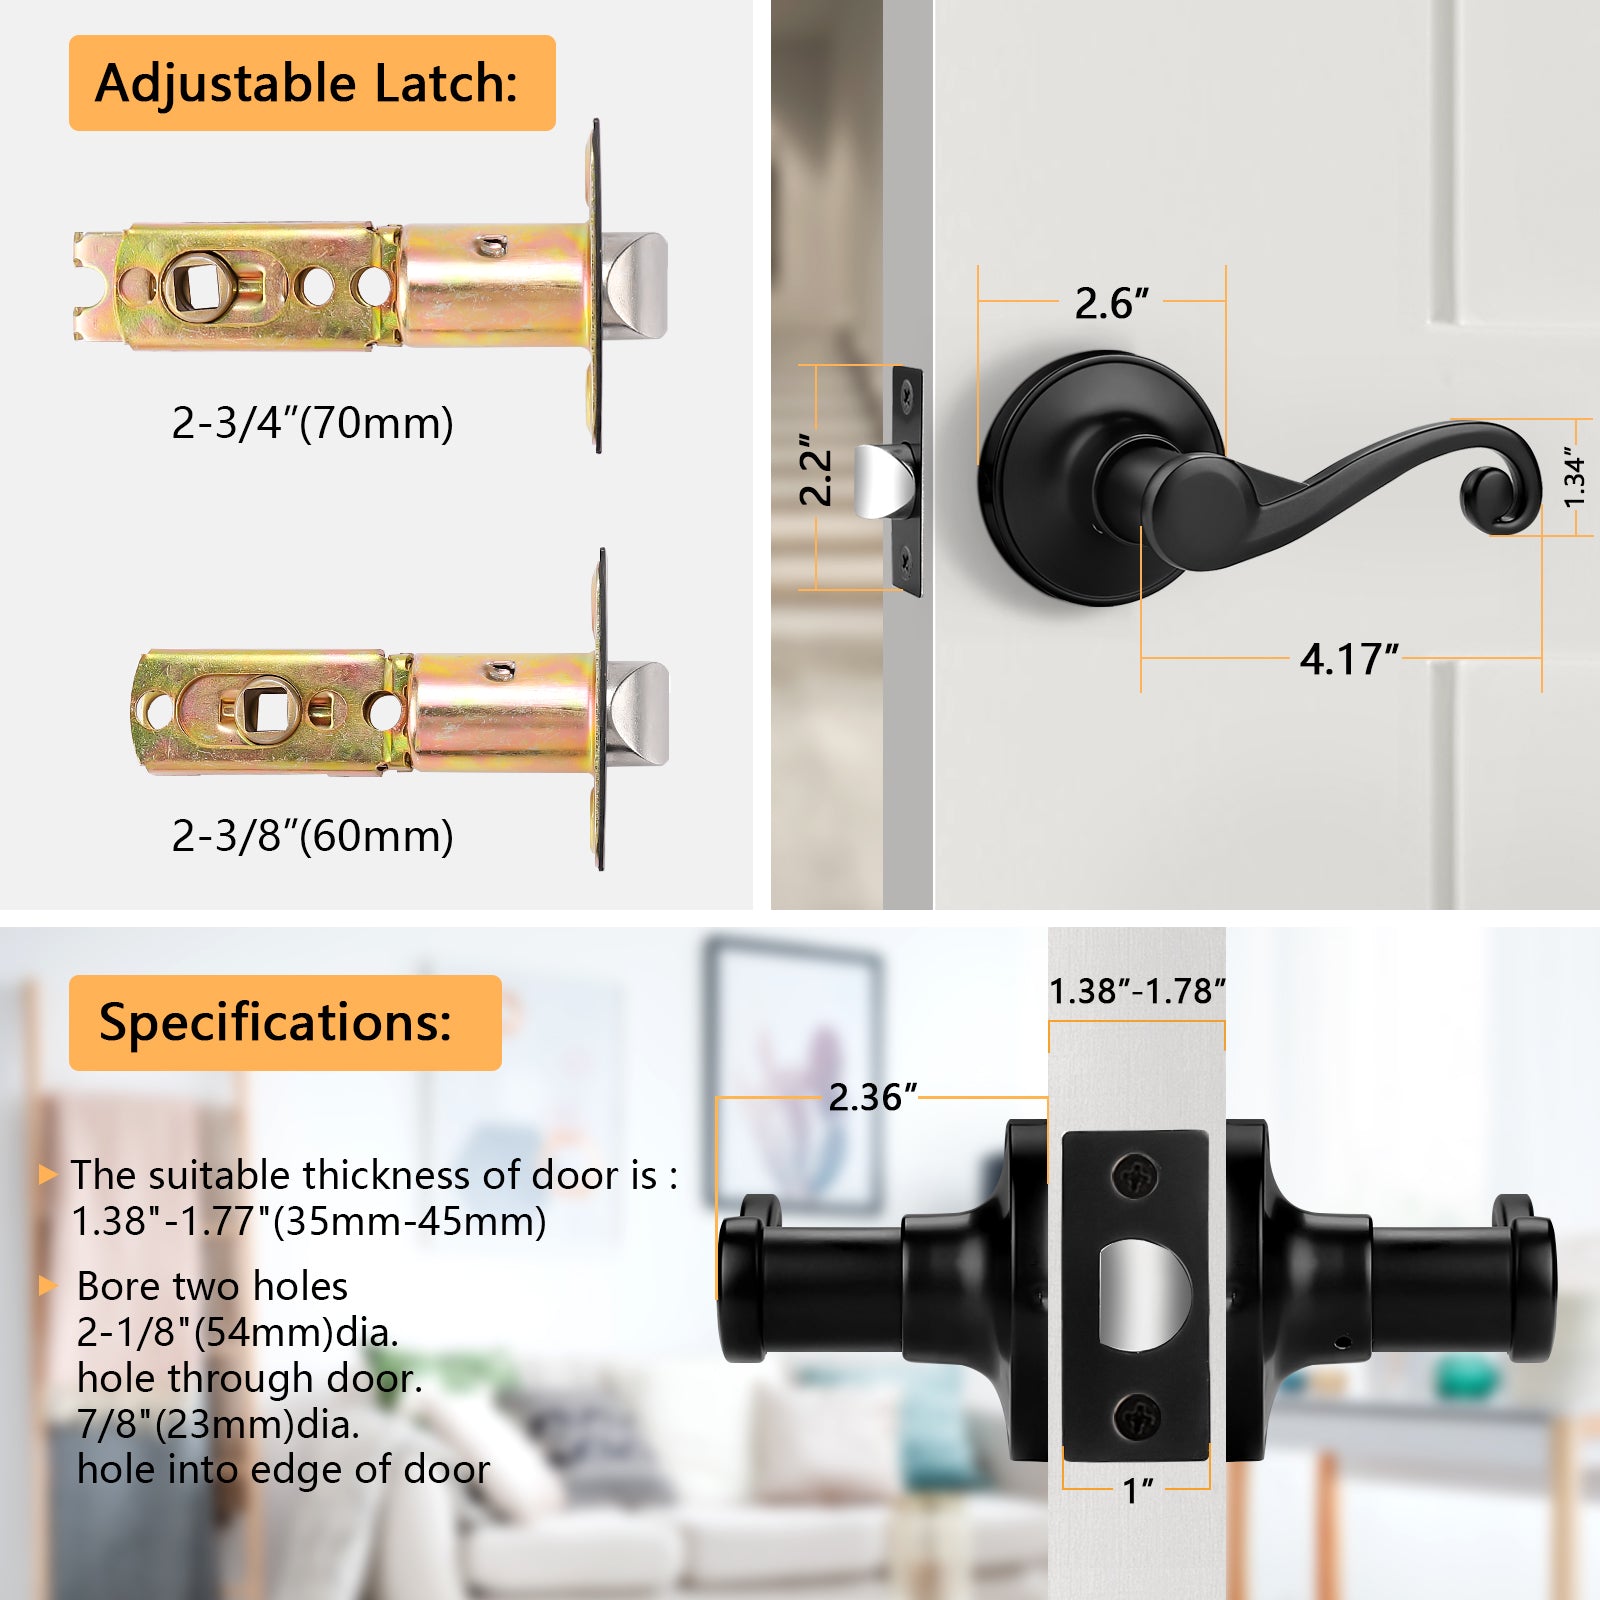 Scroll Wave Style Door Levers Black Finish Privacy/Passage Function Door Lock - DL851ABK